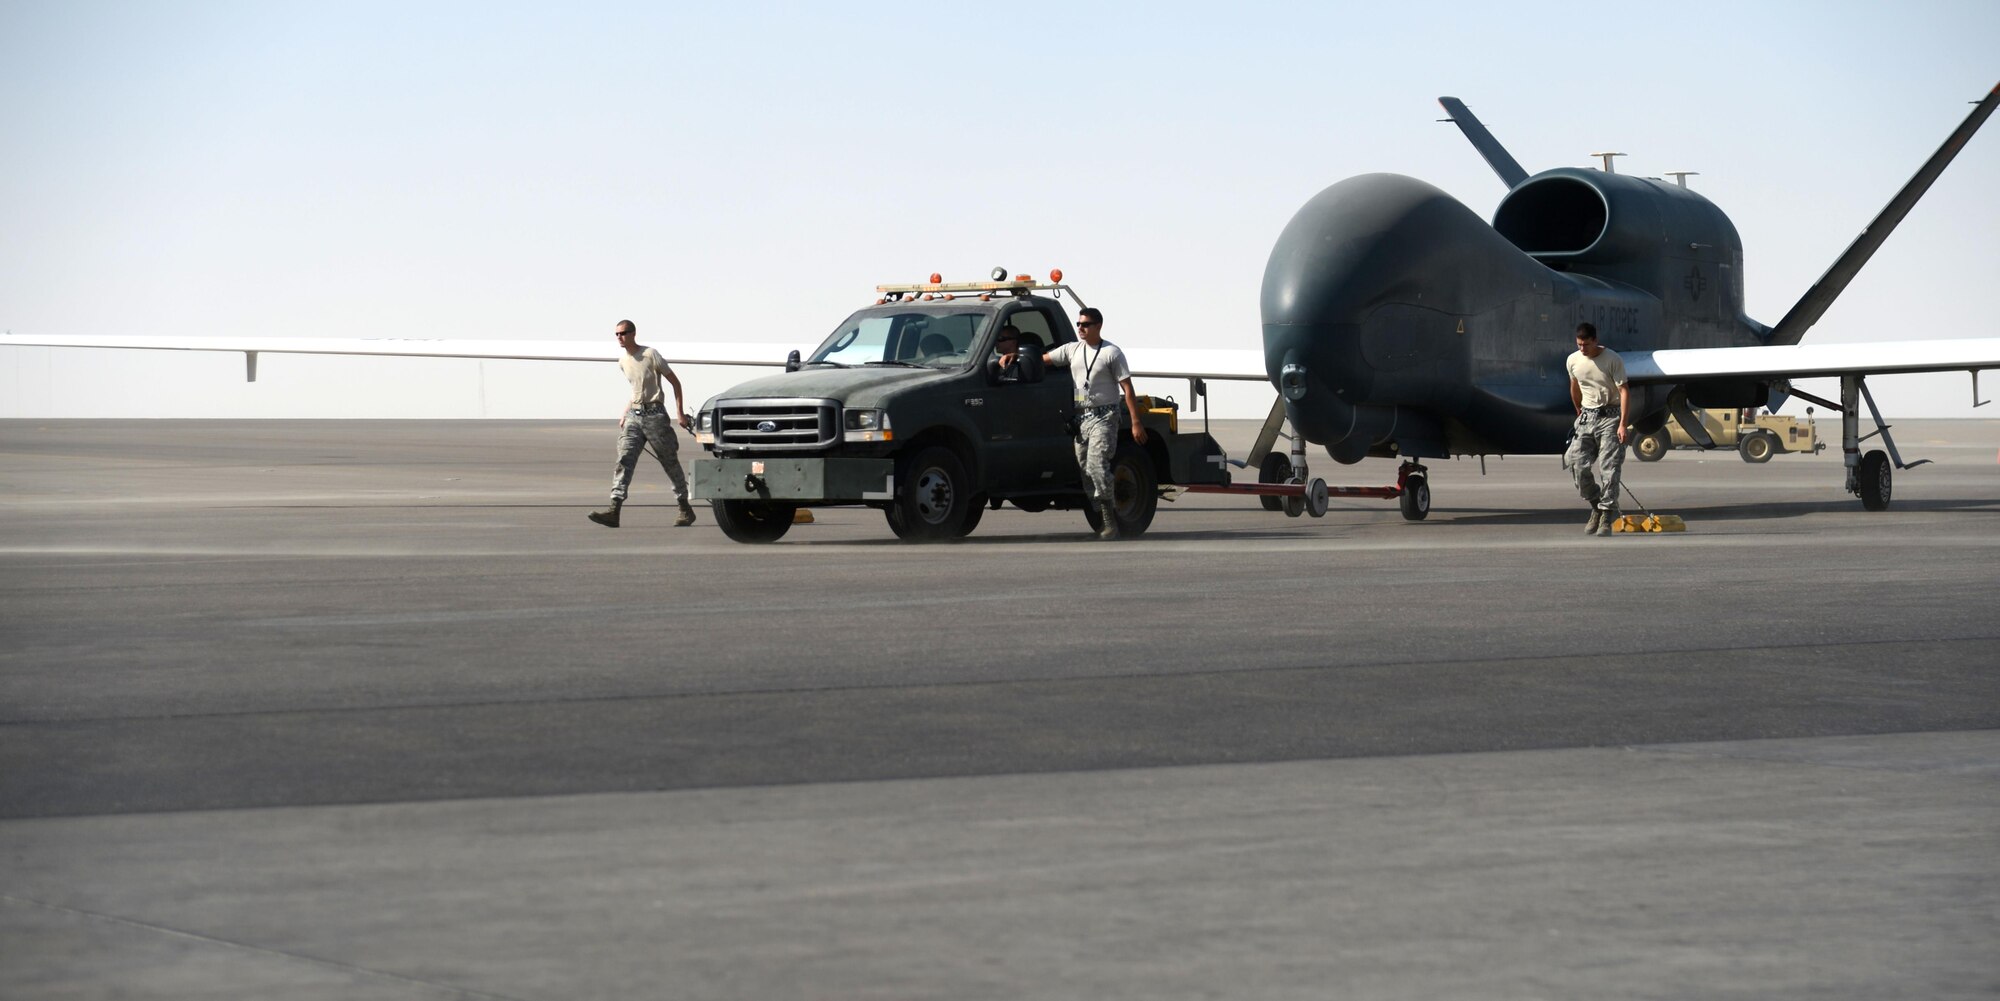 U.S. Airmen assigned to the 380th Expeditionary Aircraft Maintenance Squadron perform recovery operations for an EQ-4 Global Hawk unmanned aircraft at an undisclosed location in Southwest Asia, Nov. 11, 2015. Once the Global Hawk’s mission is complete it returns home where maintainers are able to perform ground maintenance within five hours to return the aircraft to mission ready status. (U.S. Air Force photo by Tech. Sgt. Frank Miller/Released)